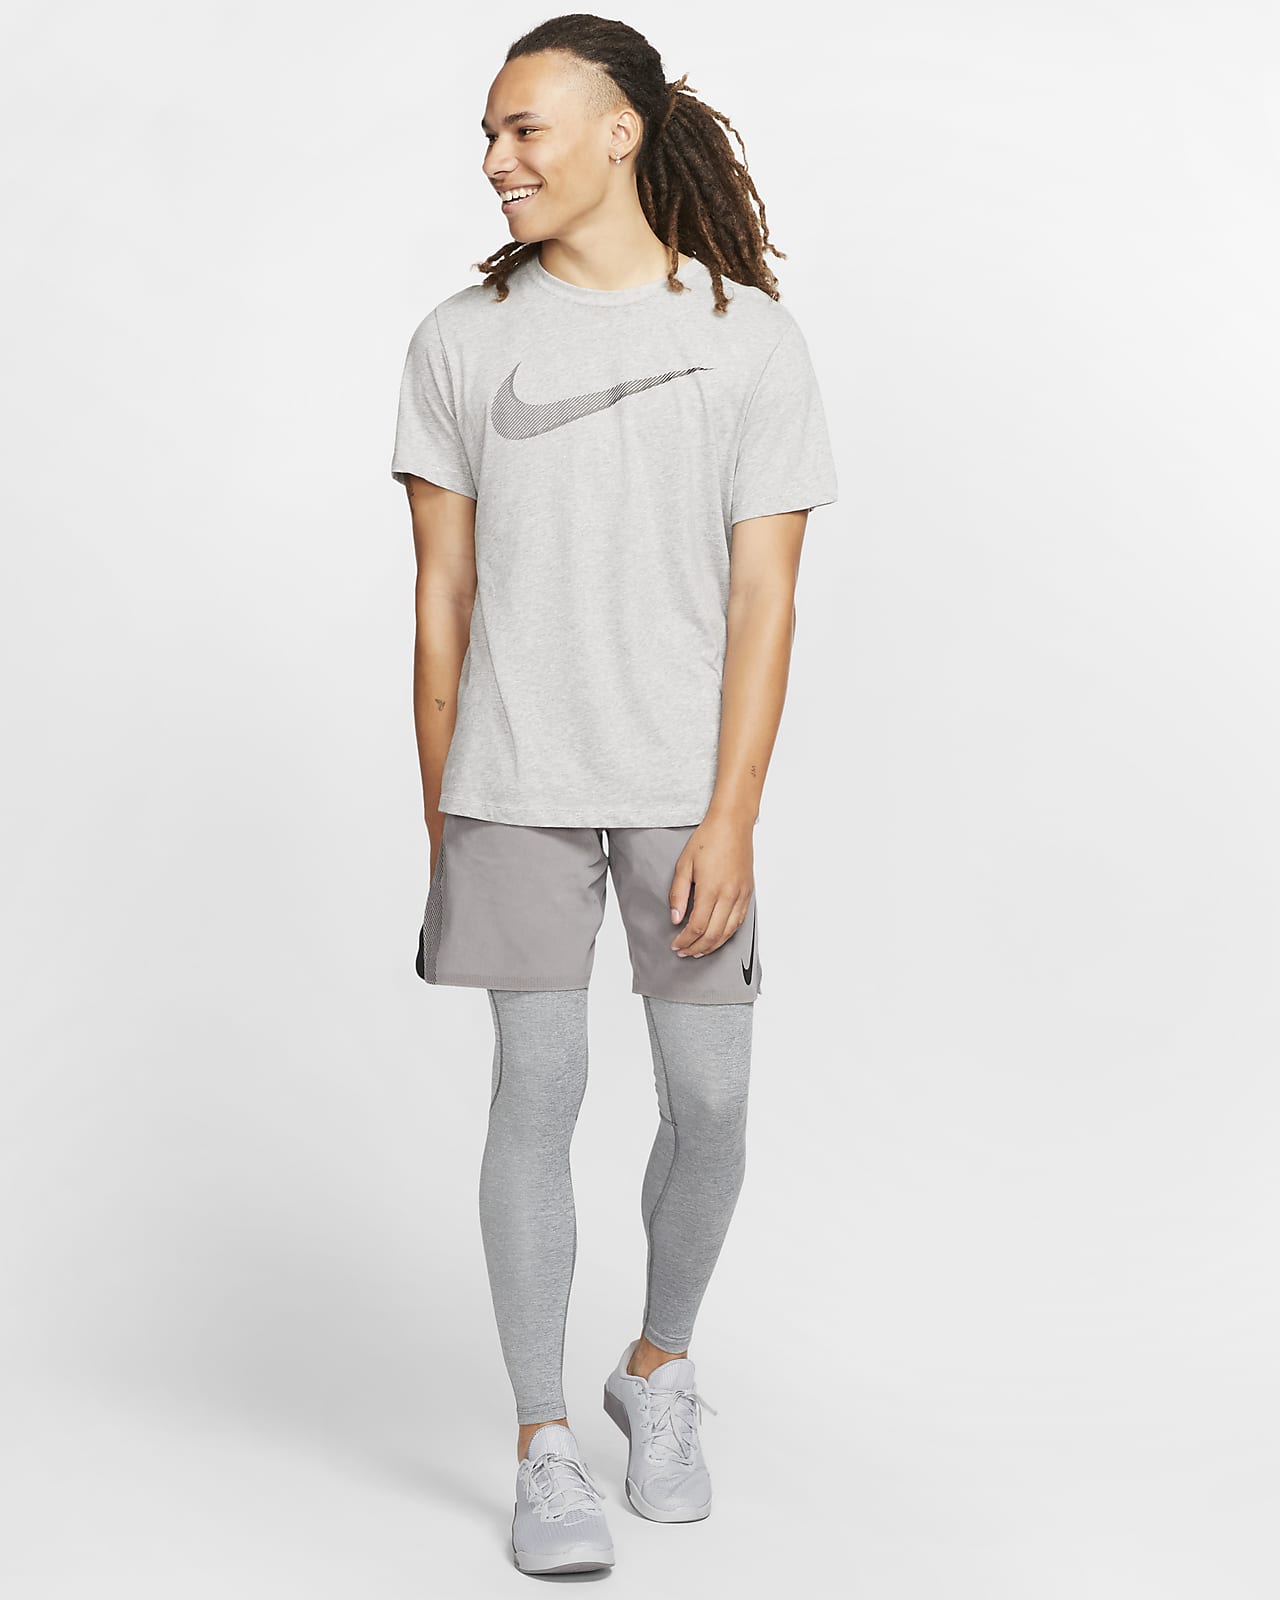 Buy > nike pro men's compression tights > in stock